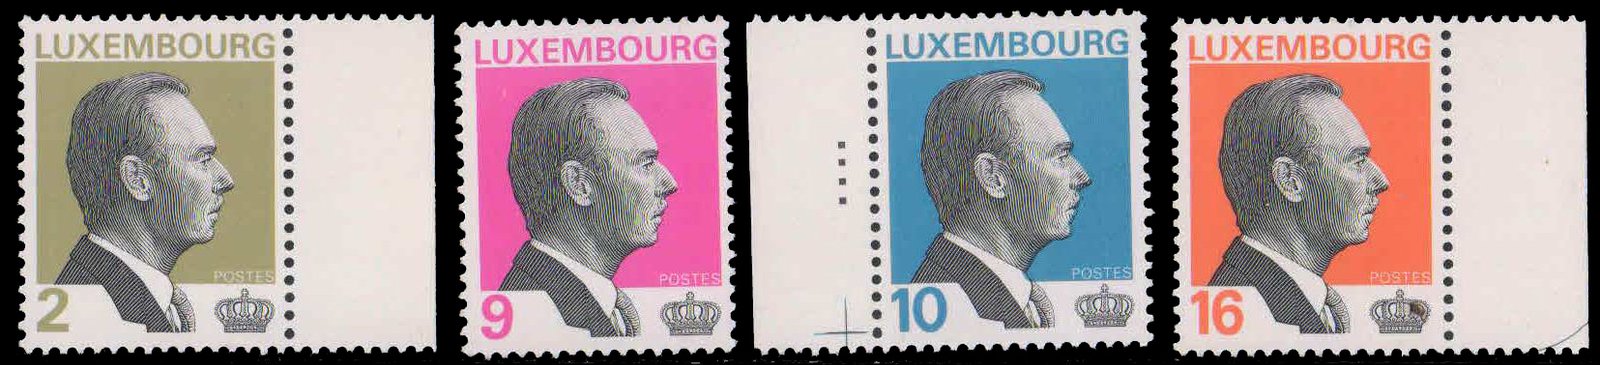 LUXEMBOURG 1993-Grand Duke Jean, 4 Different, S.G. 1331-1339-MNH, Cat £ 4-